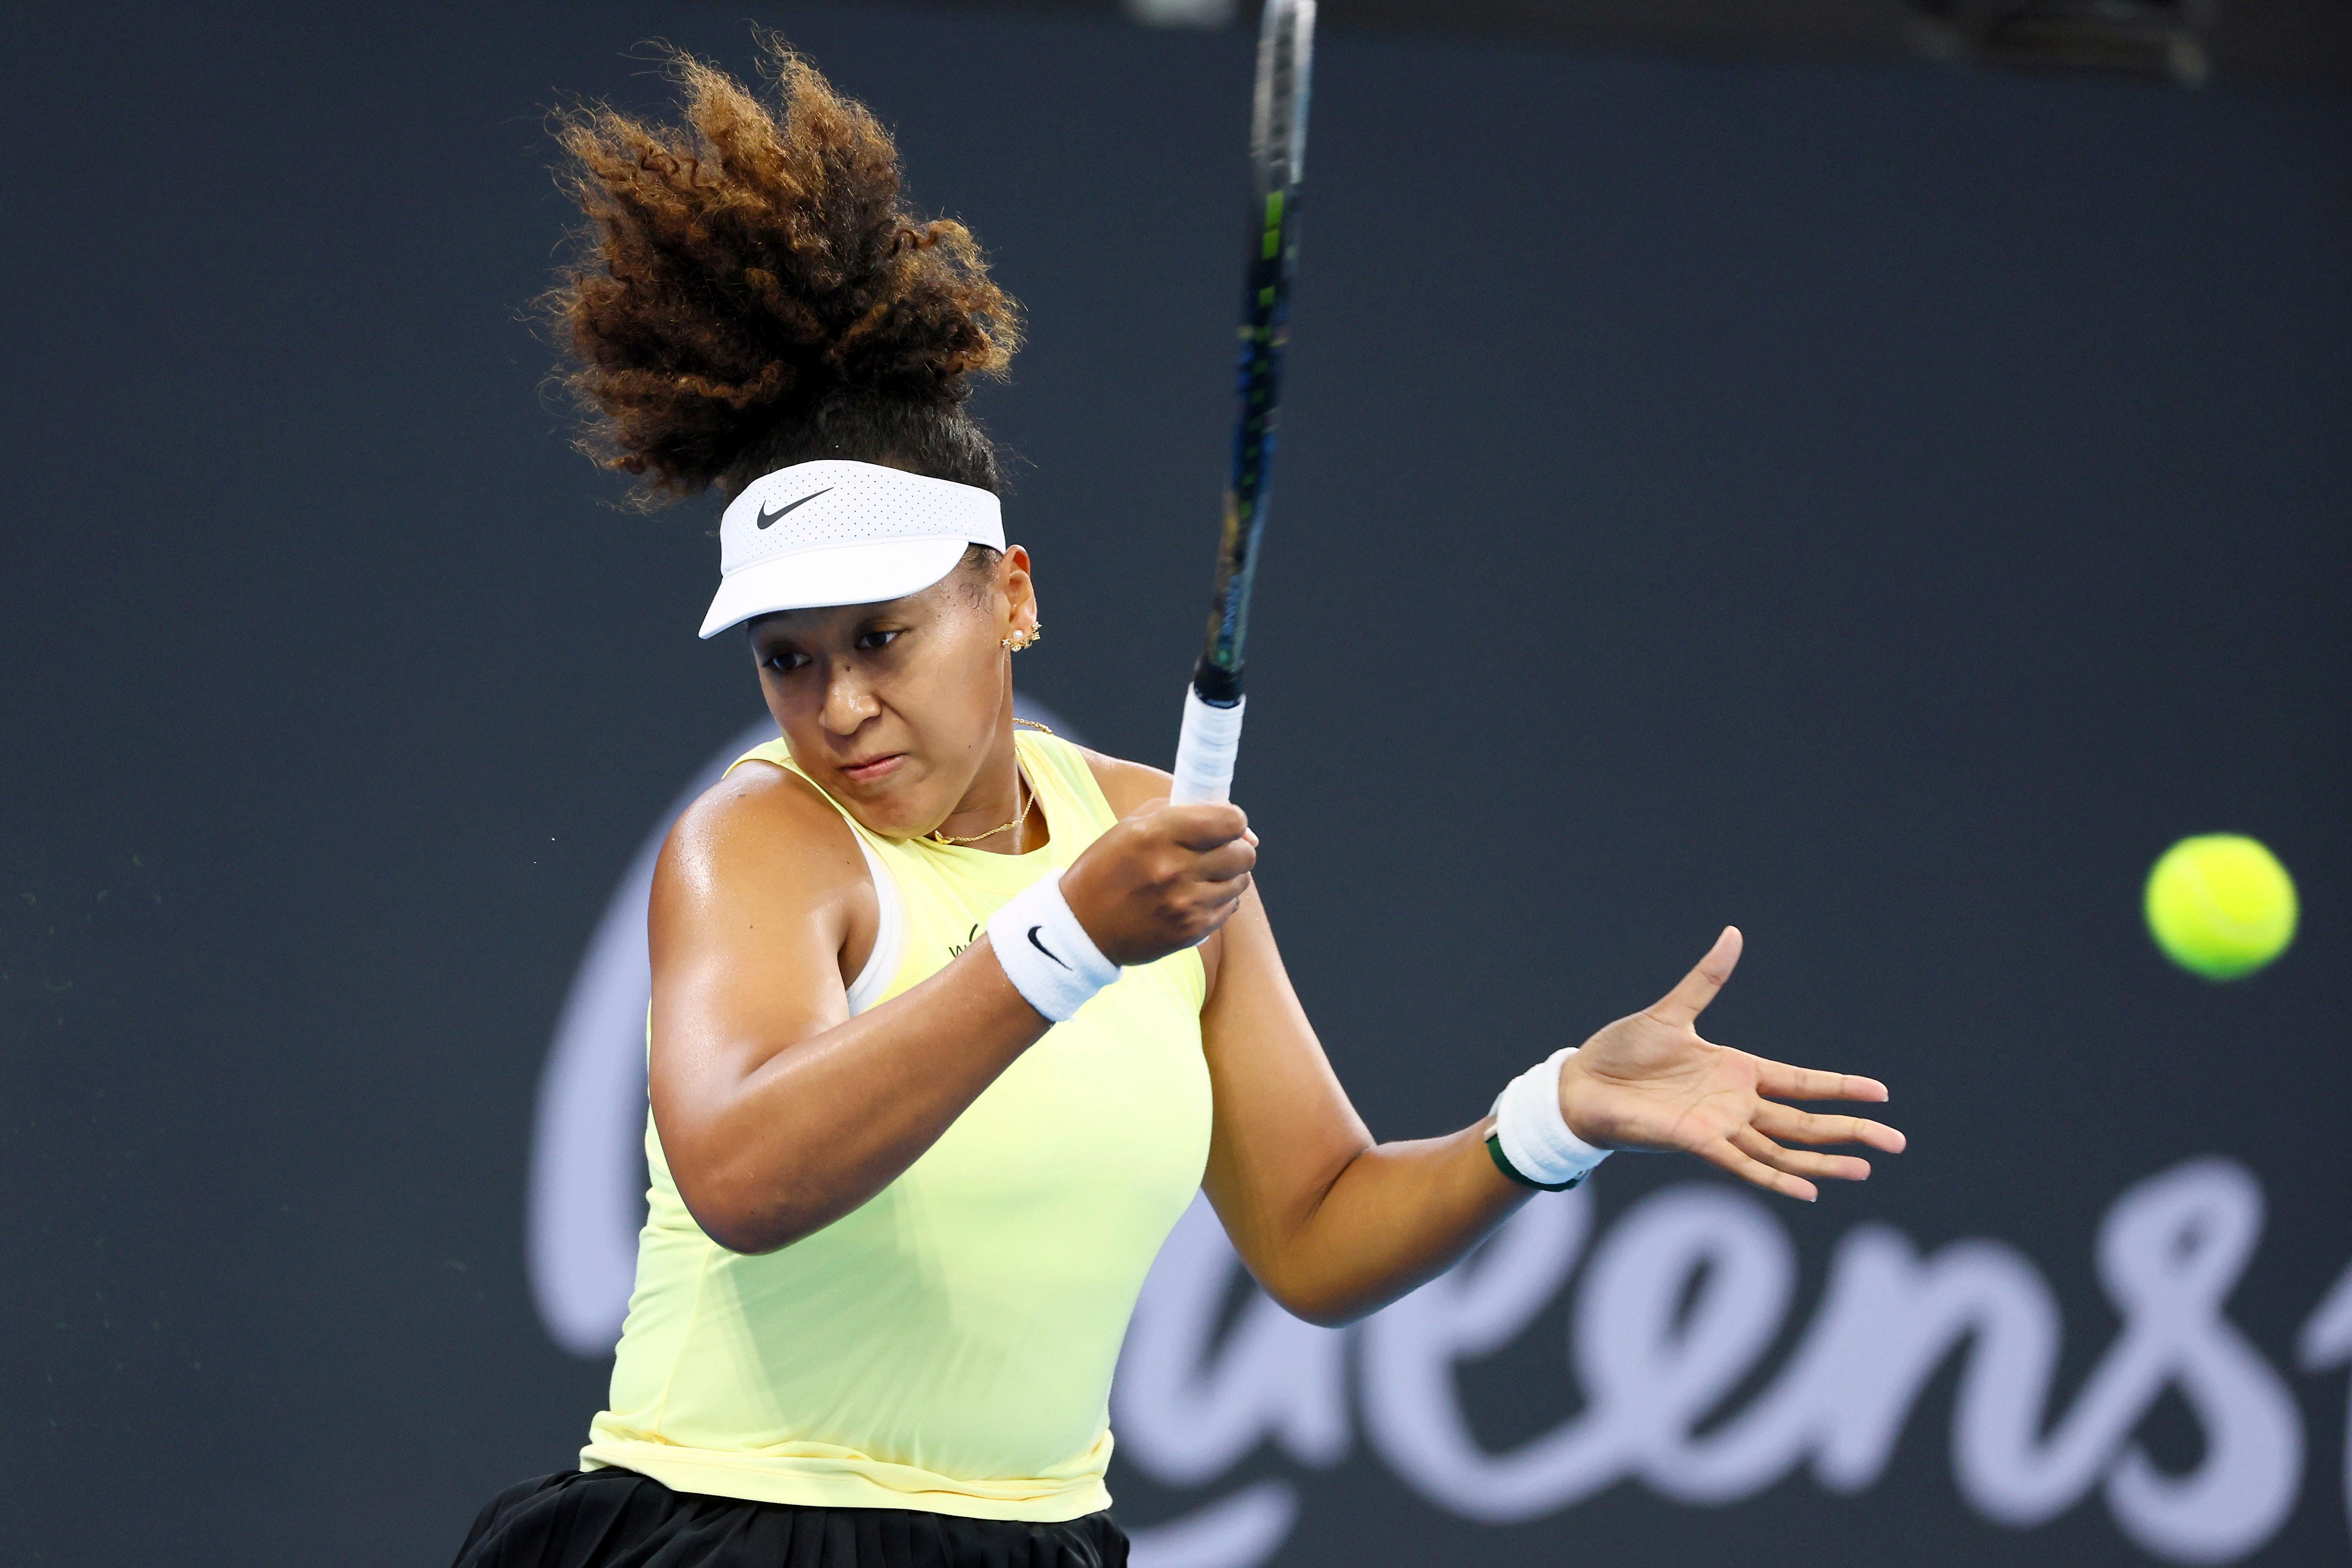 Four-time grand slam champion Naomi Osaka returned to the court in style